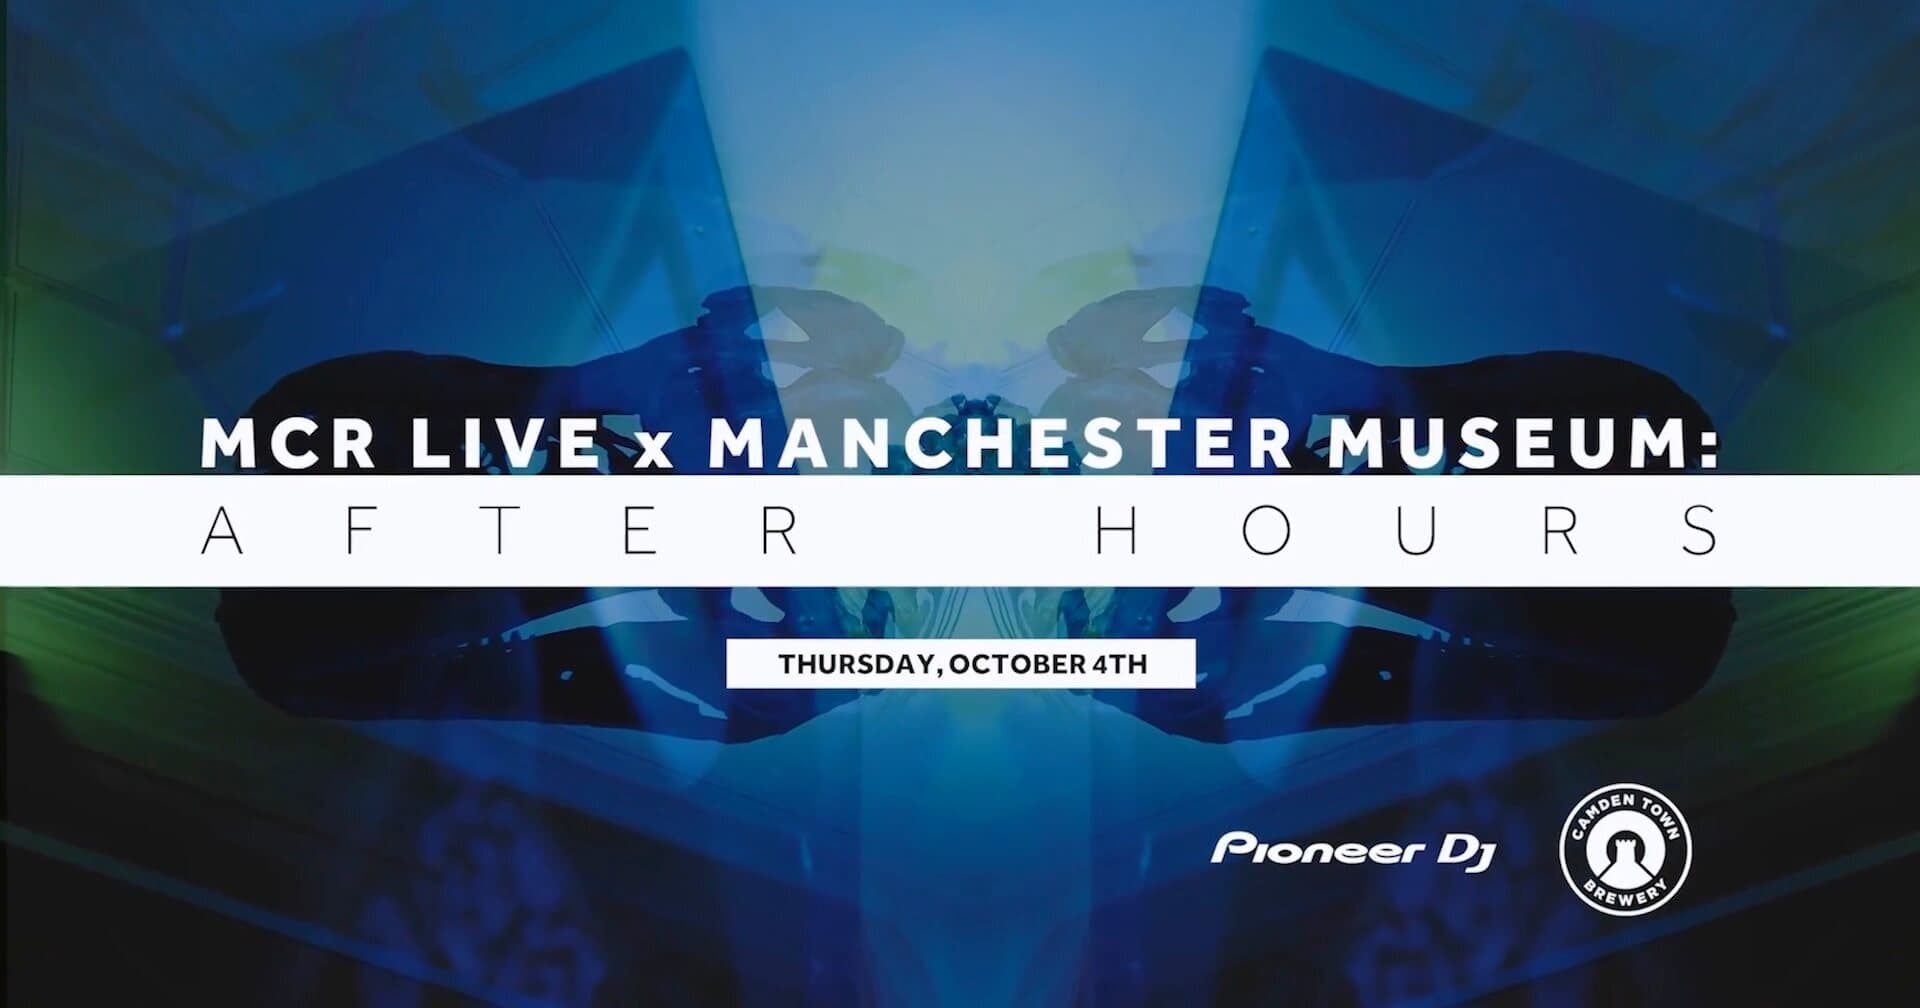 MCR Live event with Pioneer at Manchester Museum